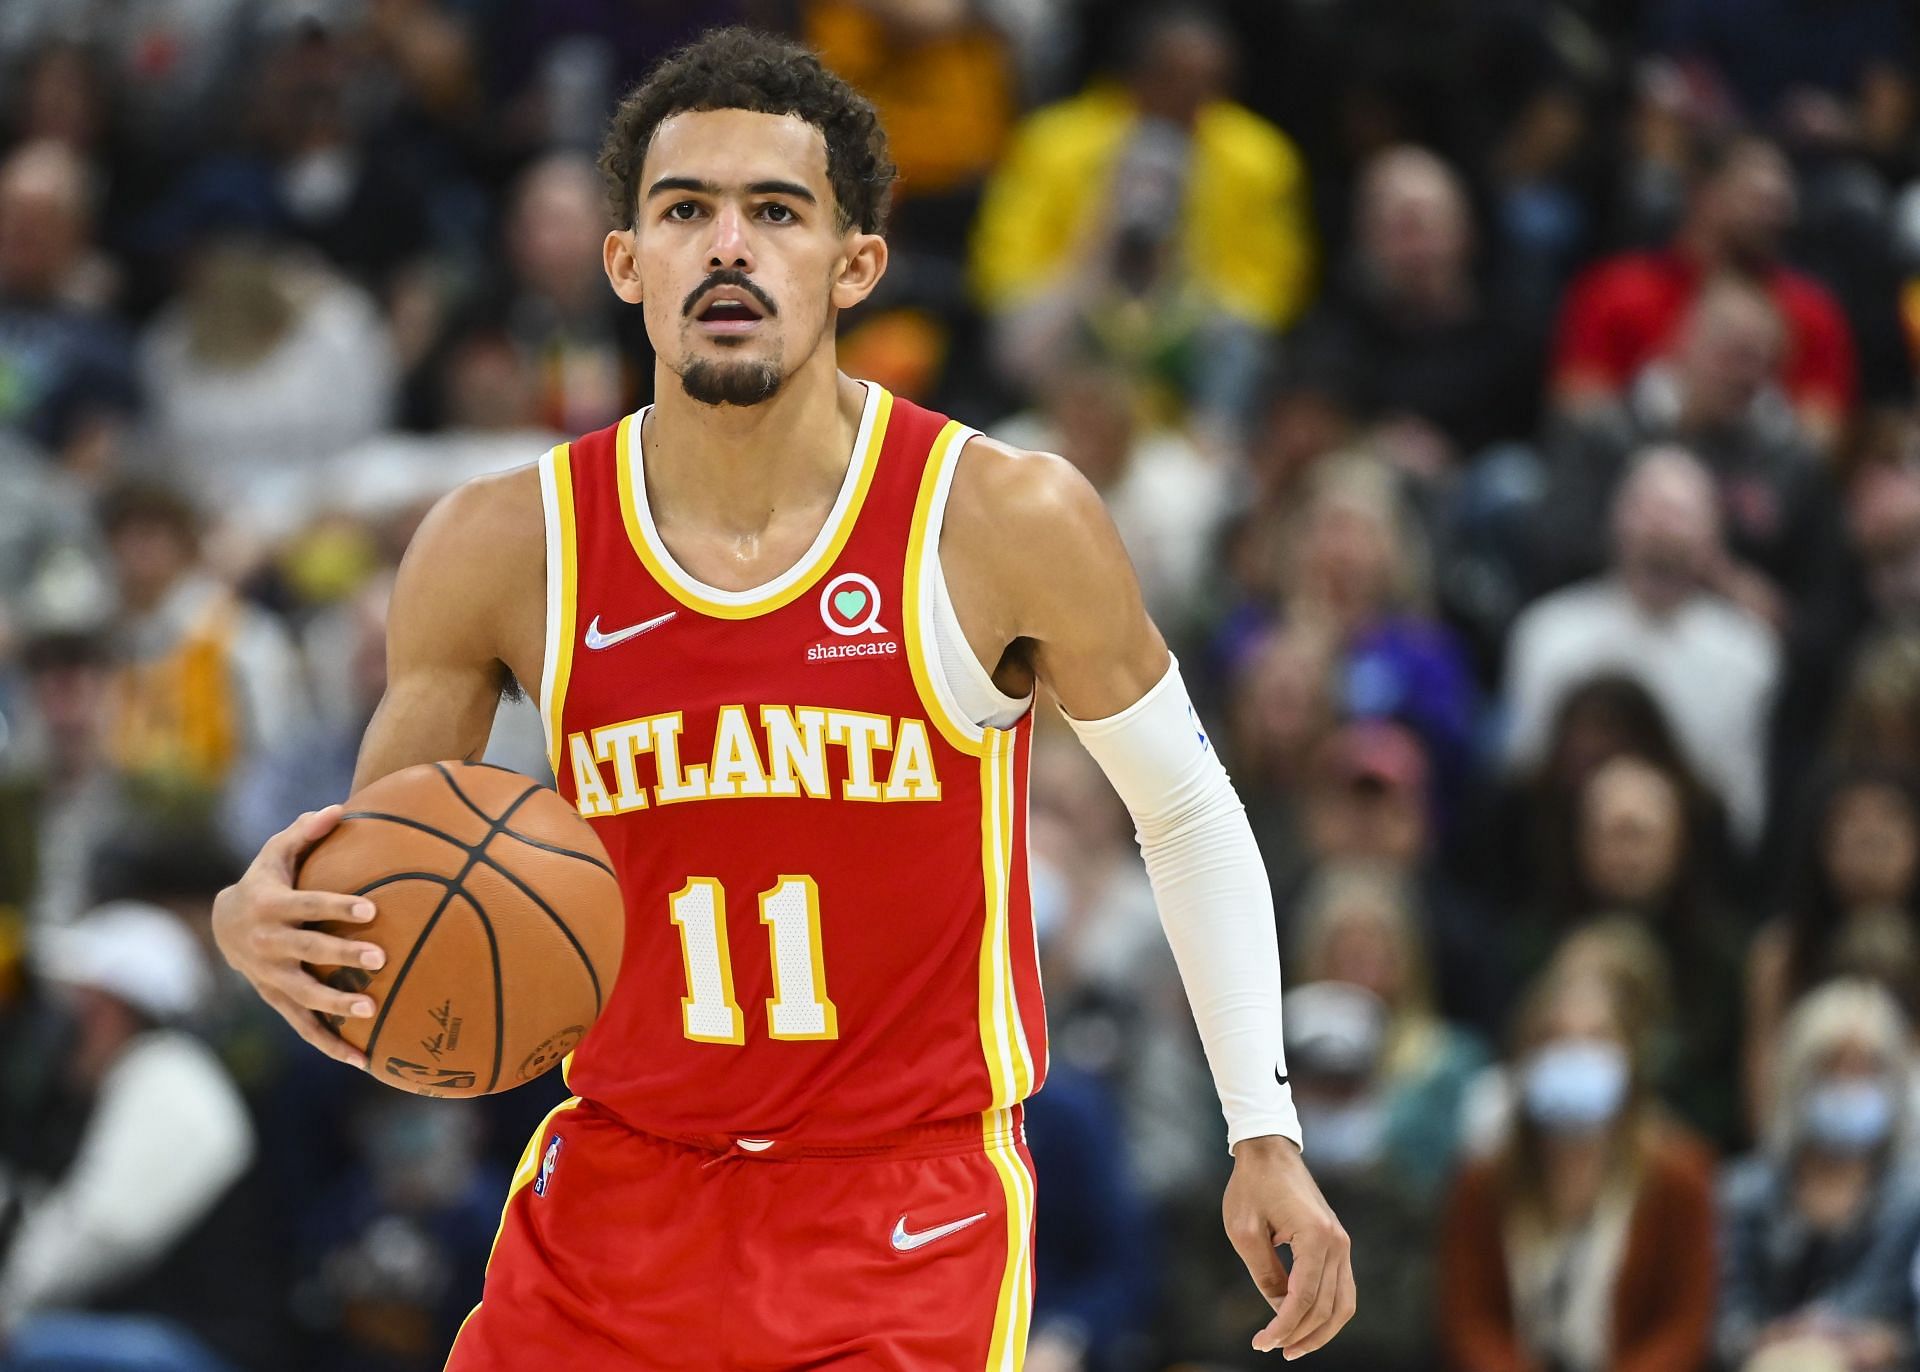 Trae Young in action for the Atlanta Hawks.